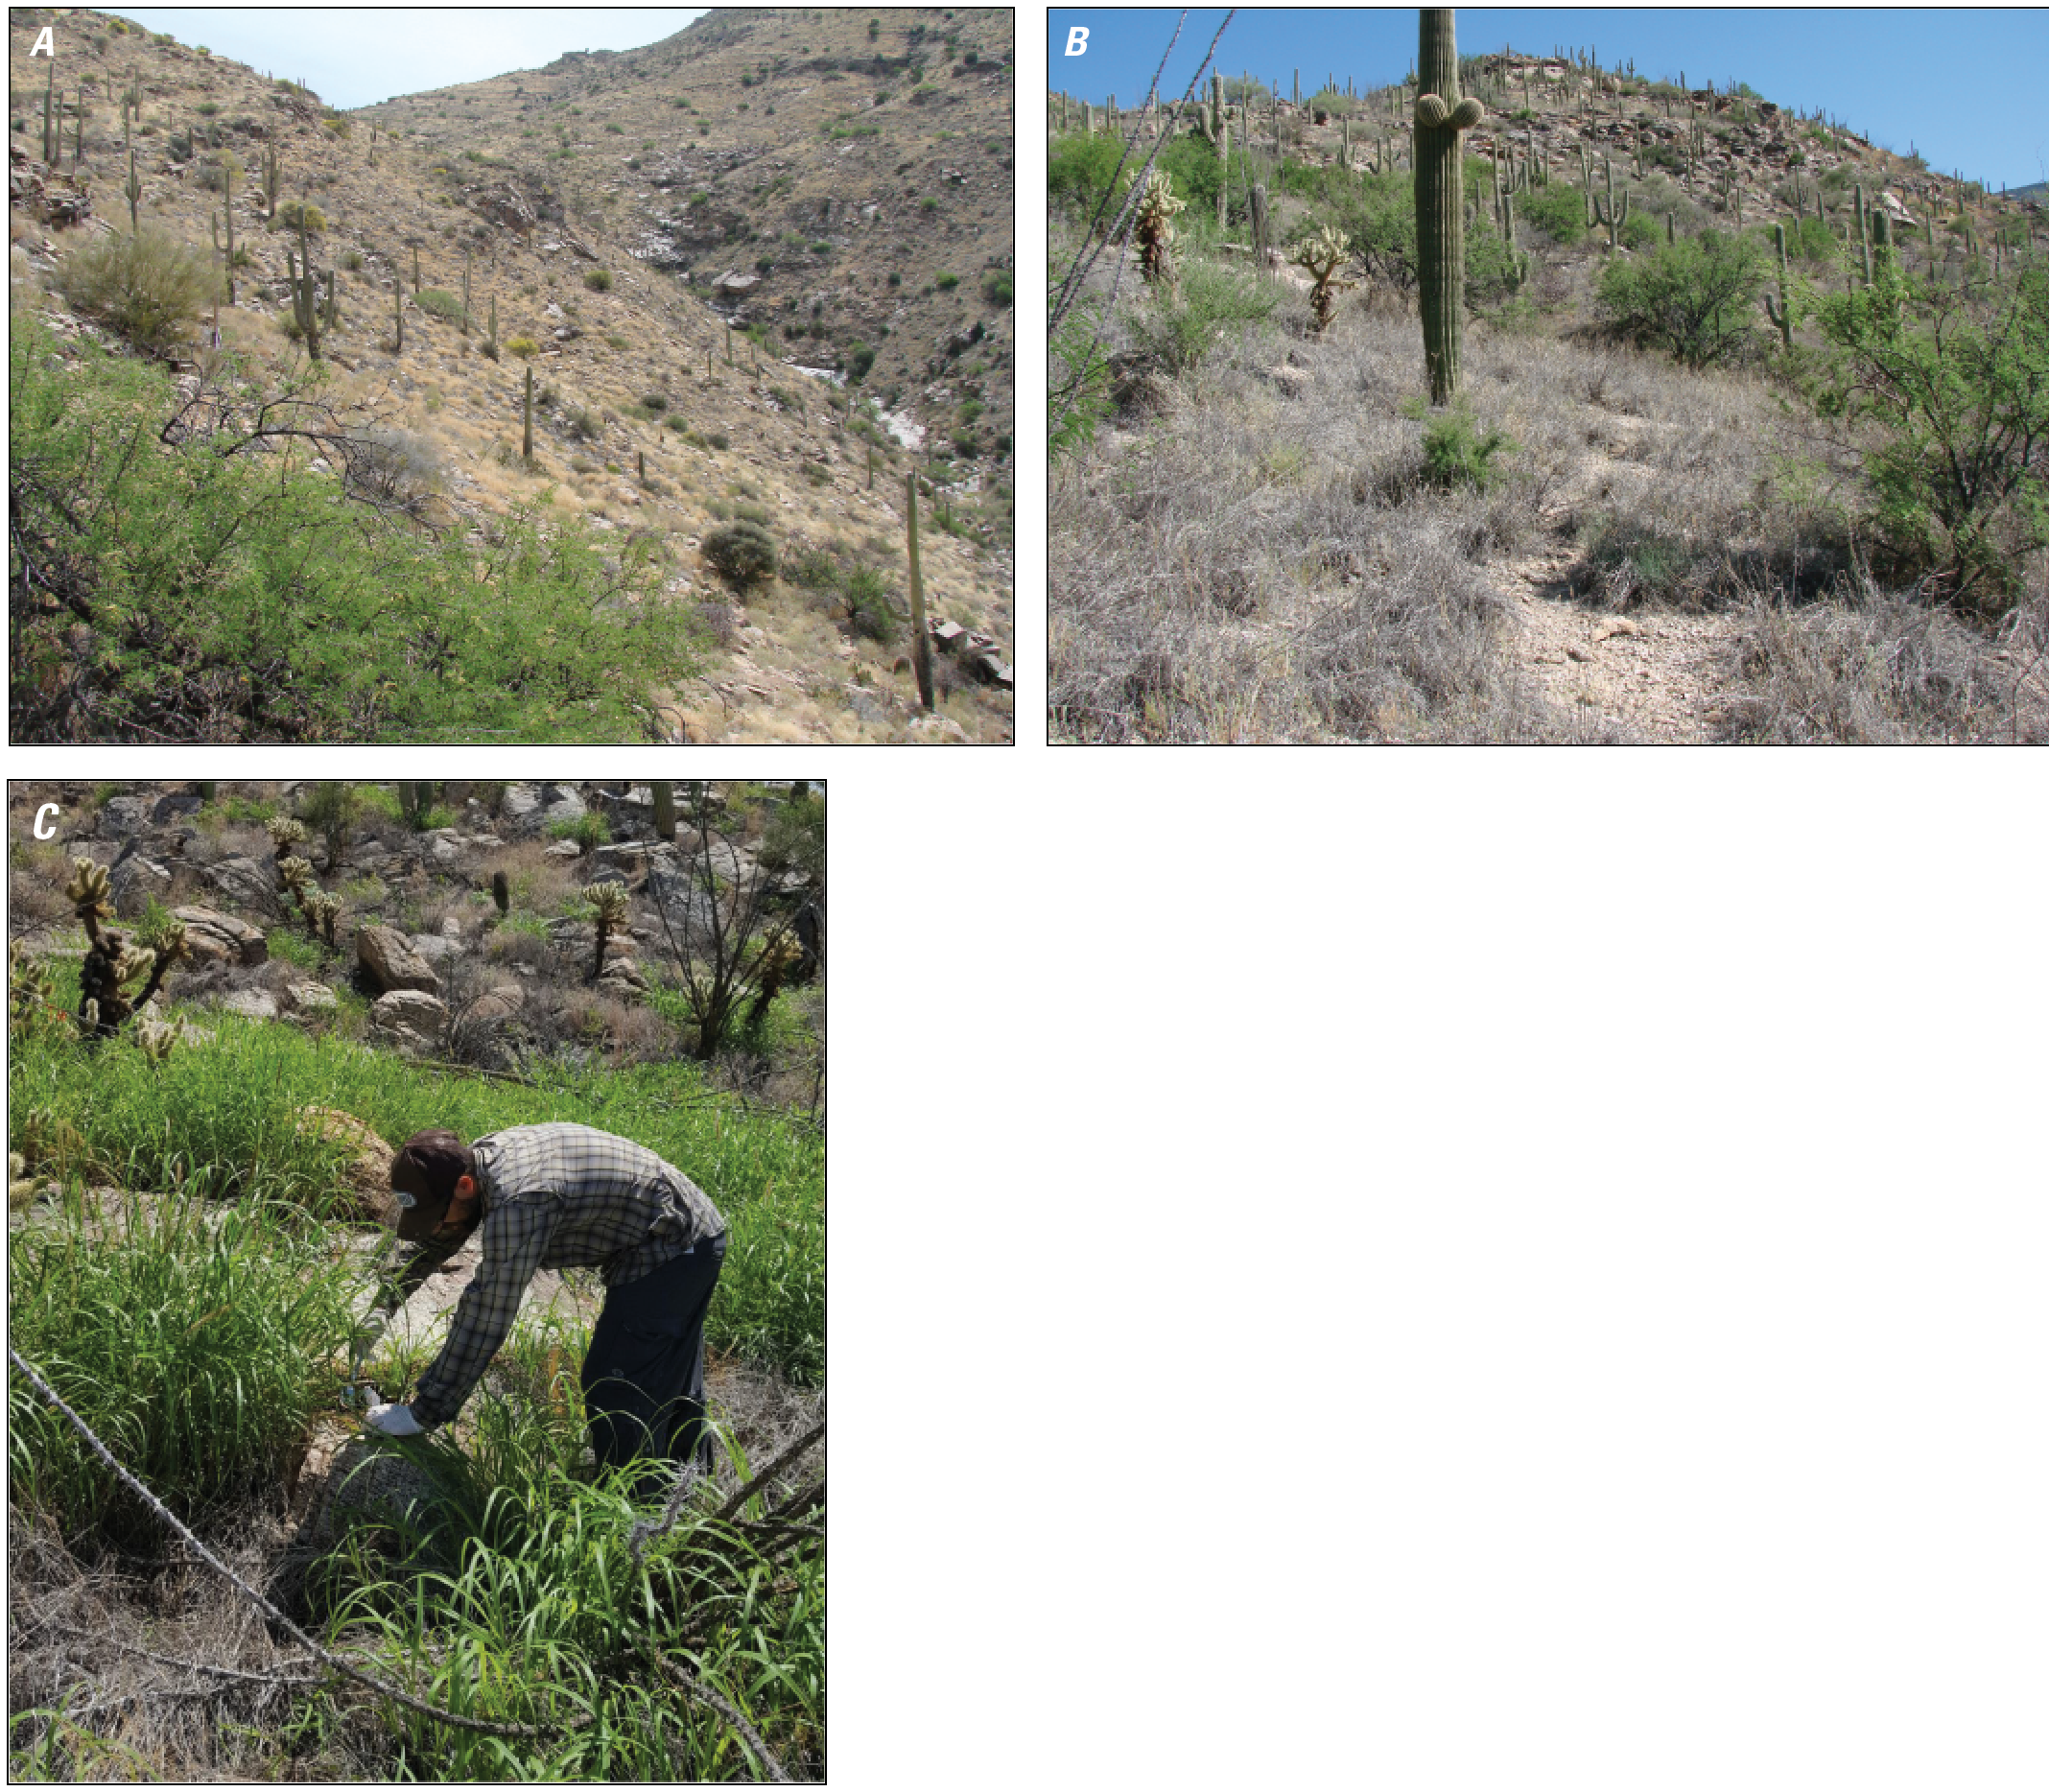 Photographs of terrestrial soil sampling locations in Box Canyon, Madrona Canyon,
                        and Loma Verde canyon.